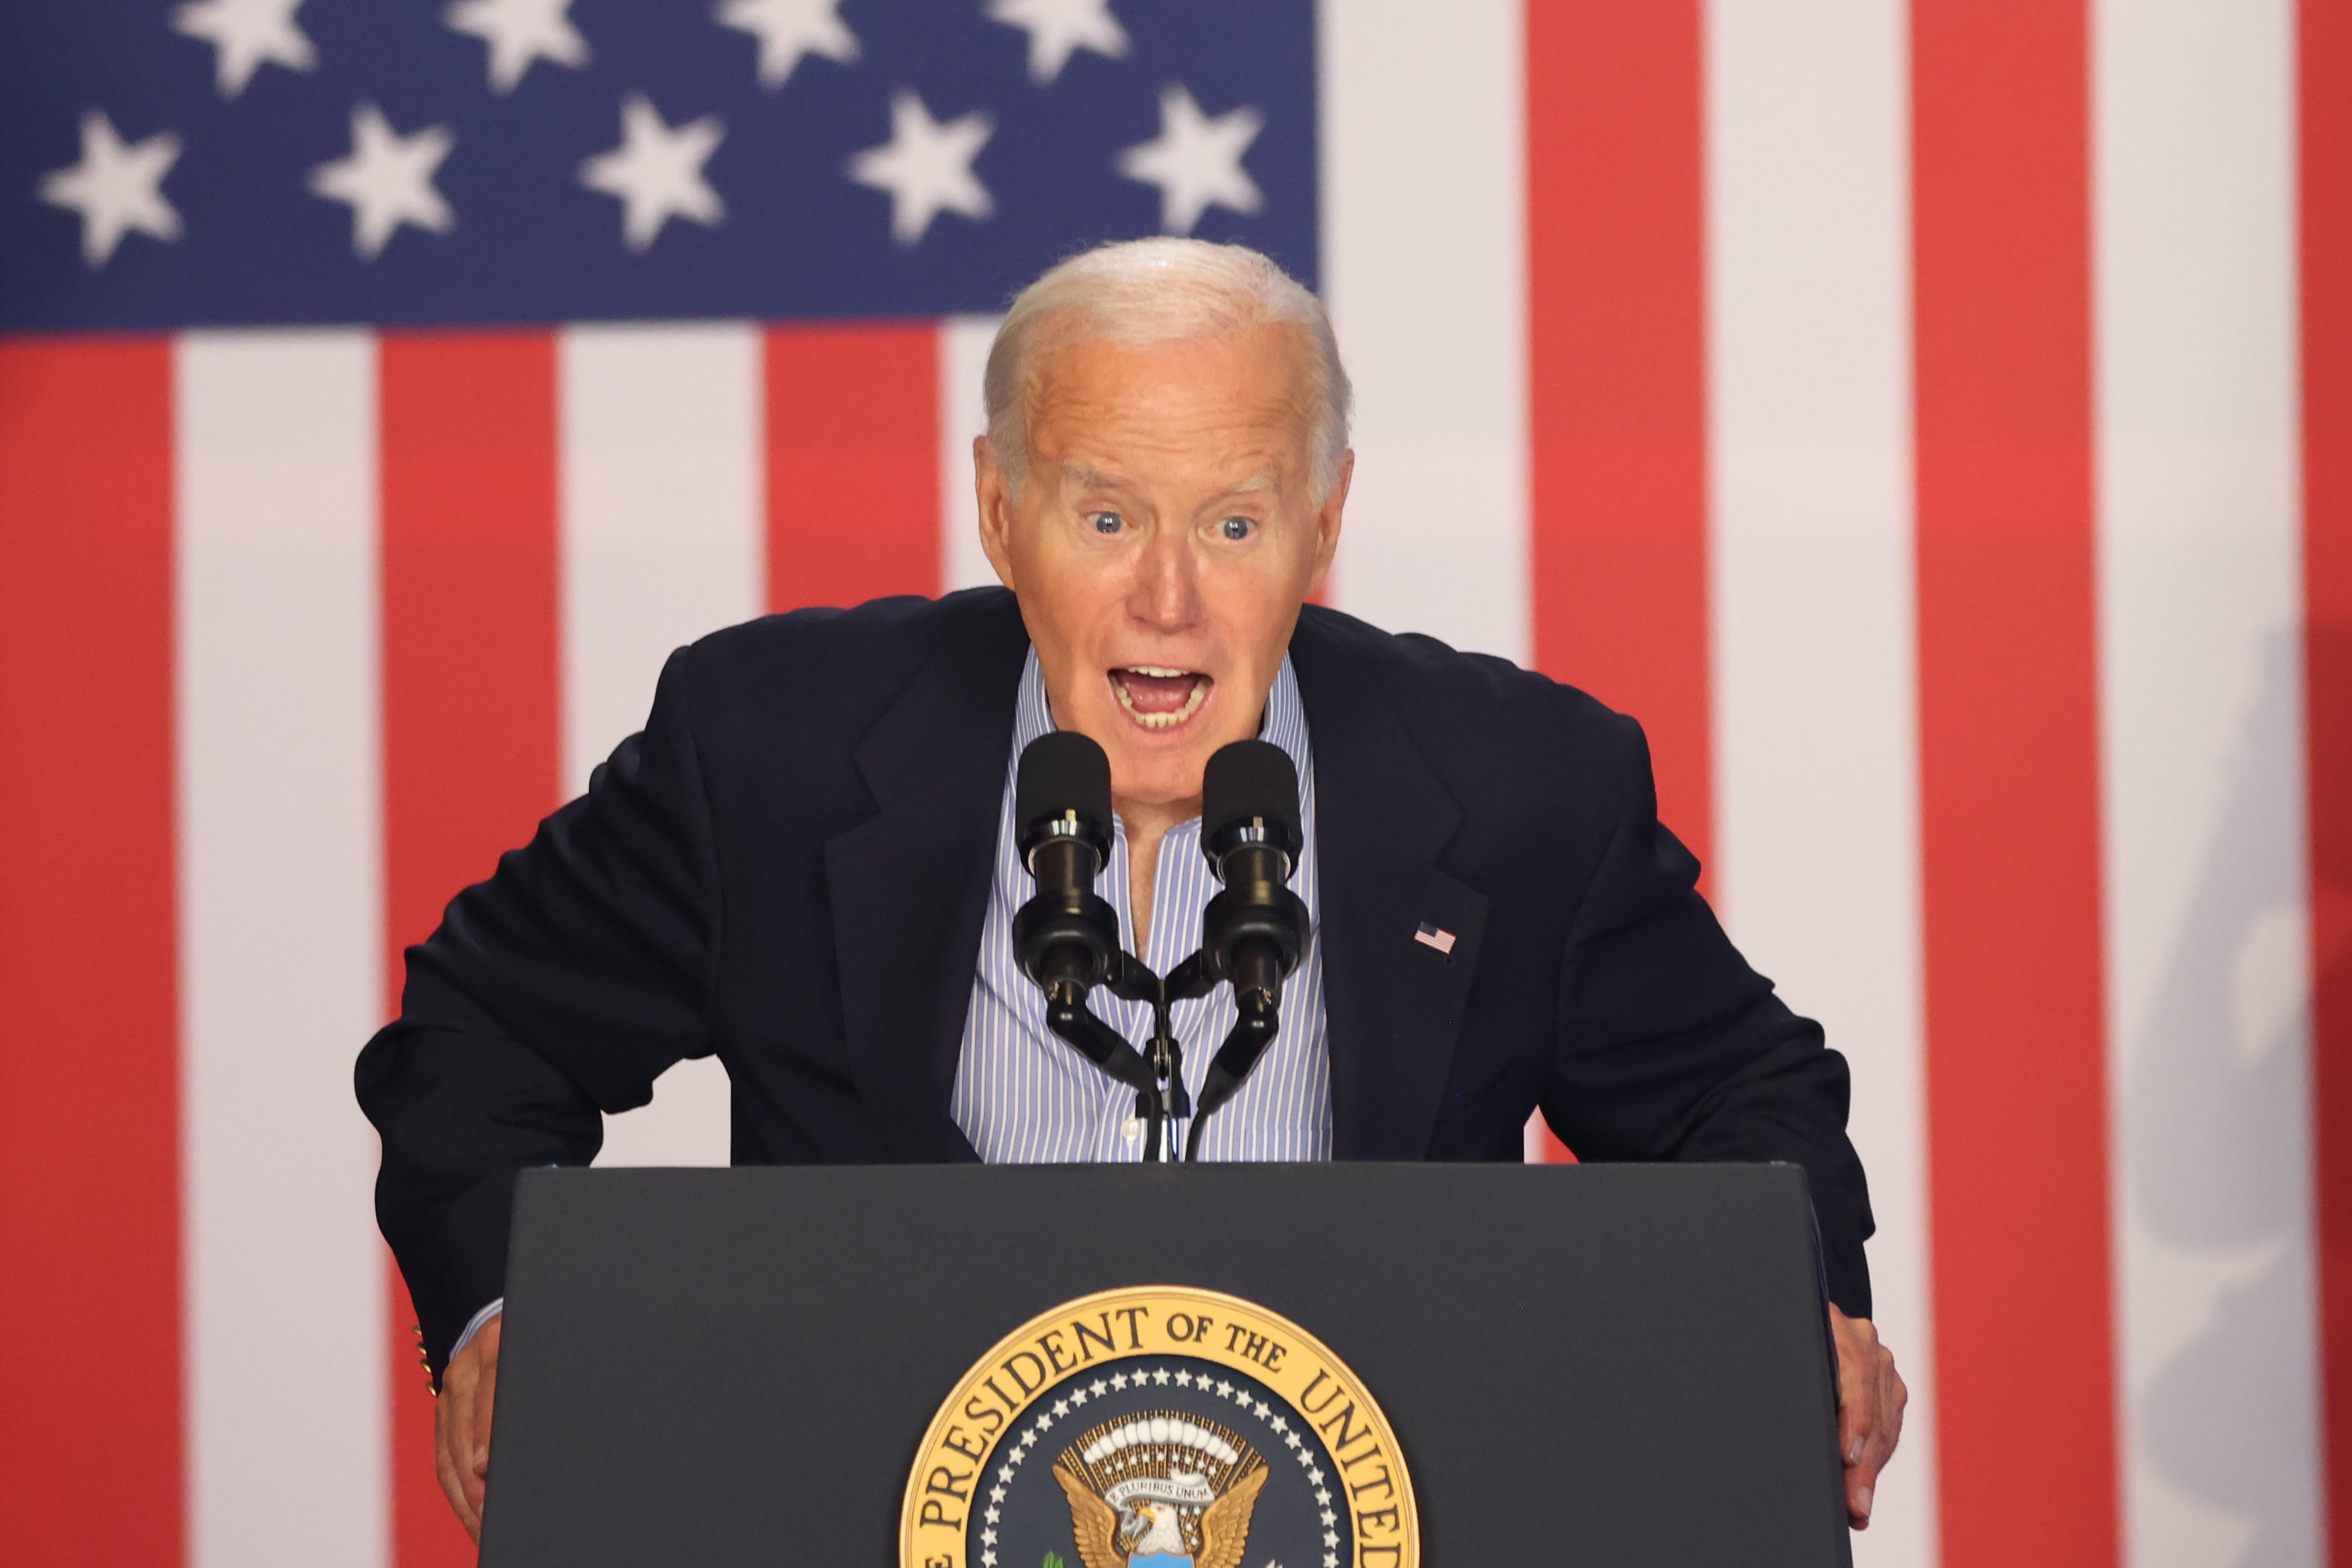 Analysis | Biden meets his critics with defiance. But they see him in denial.